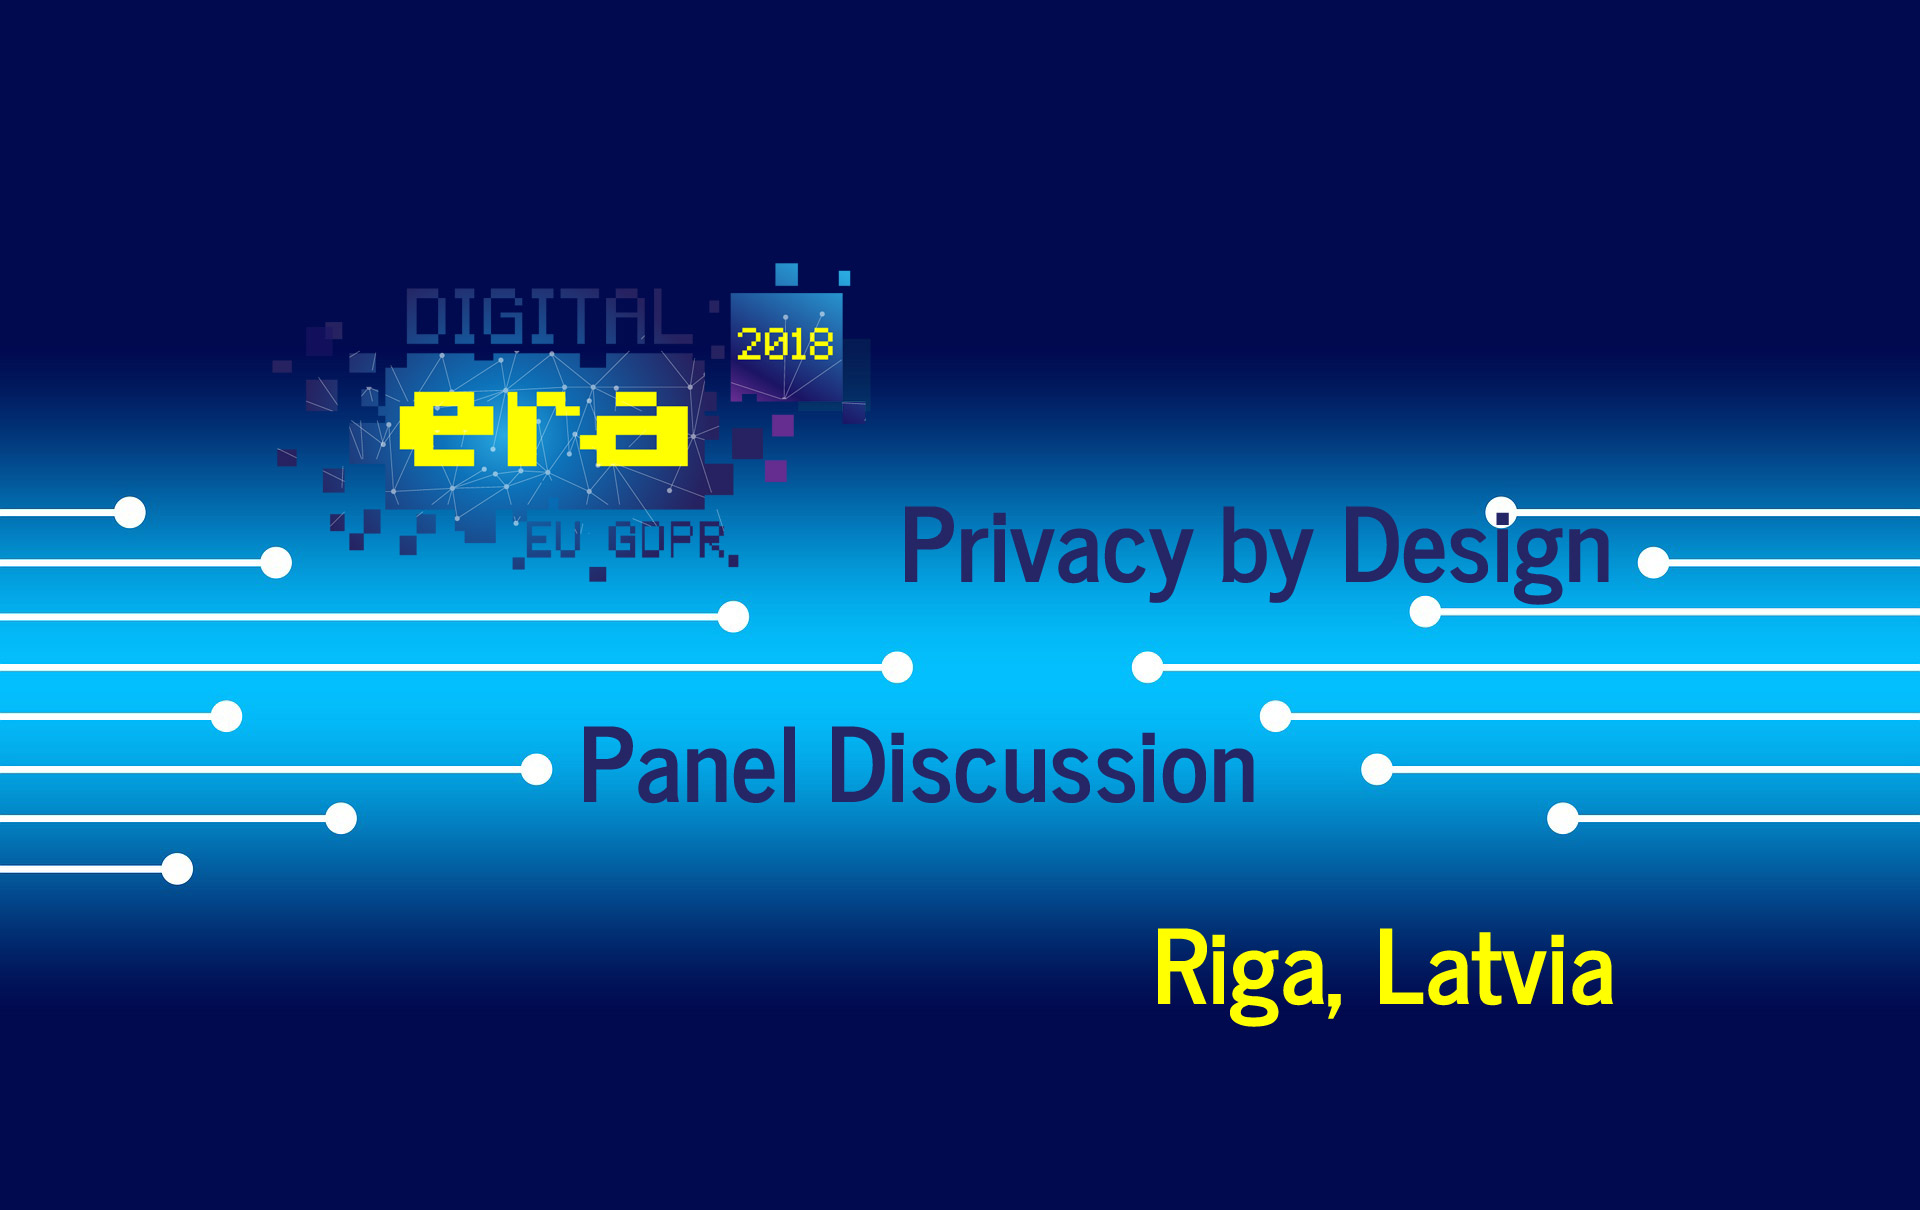 Digital Era 2018 Forum: Panel discussion on Privacy by Design. Riga, Latvia, May 25, 2018